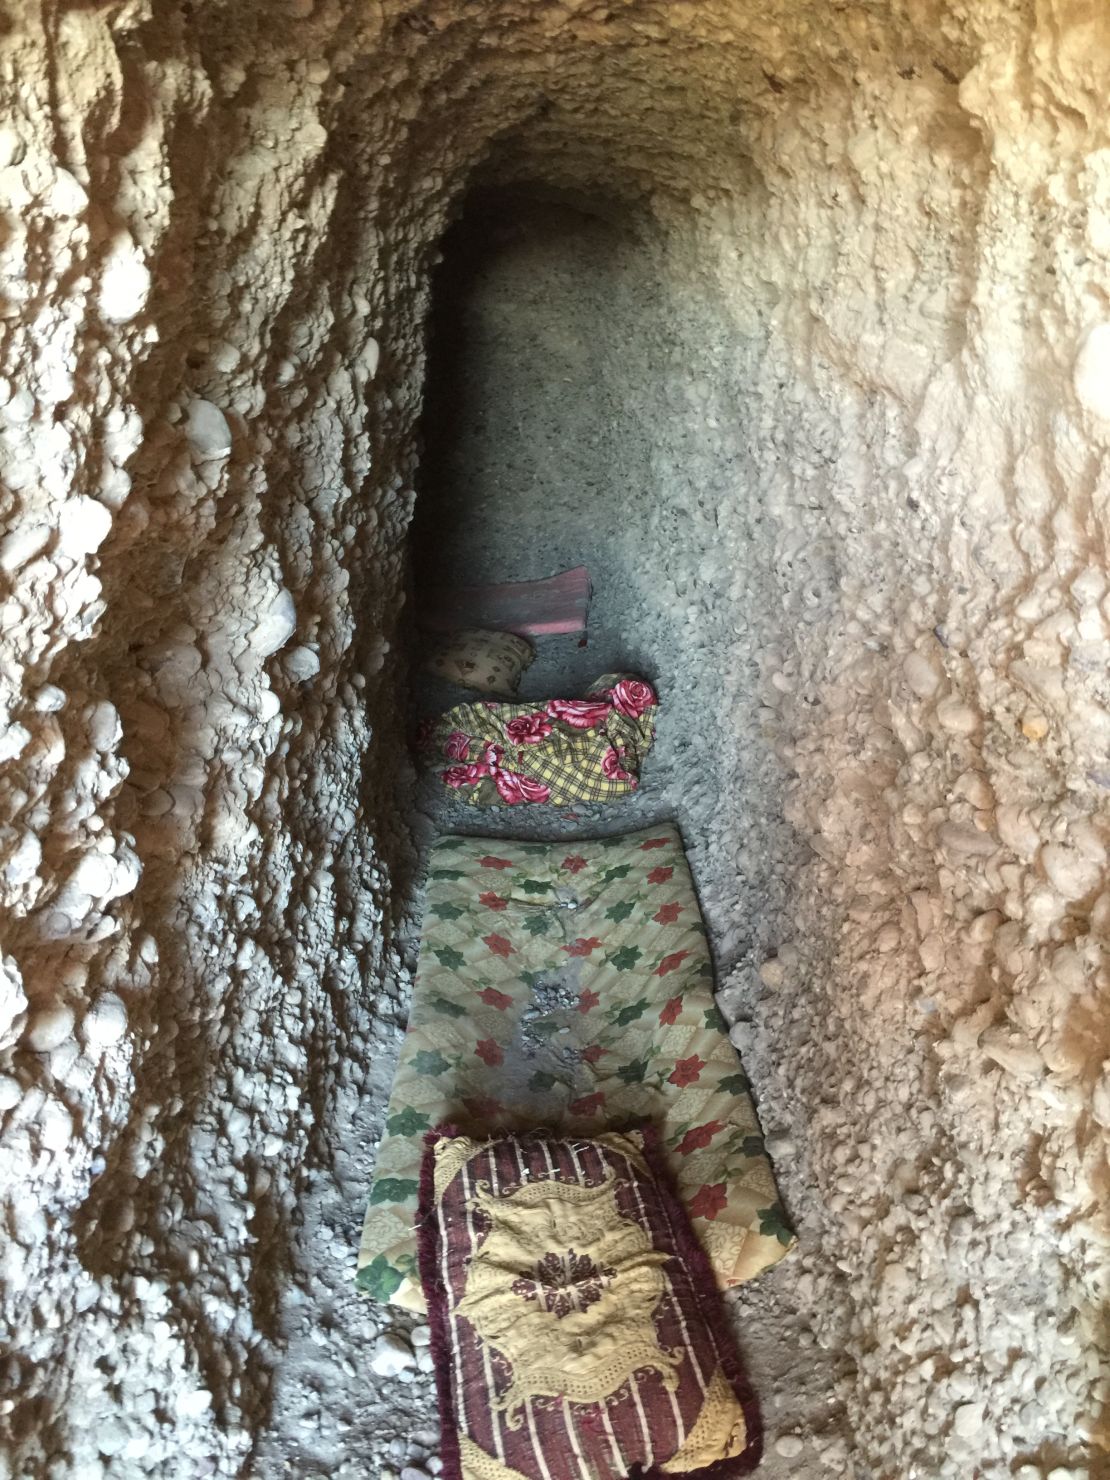 ISIS militants dug tunnels beneath a hill in Kharbardan in which to shelter from coalition airstrikes.